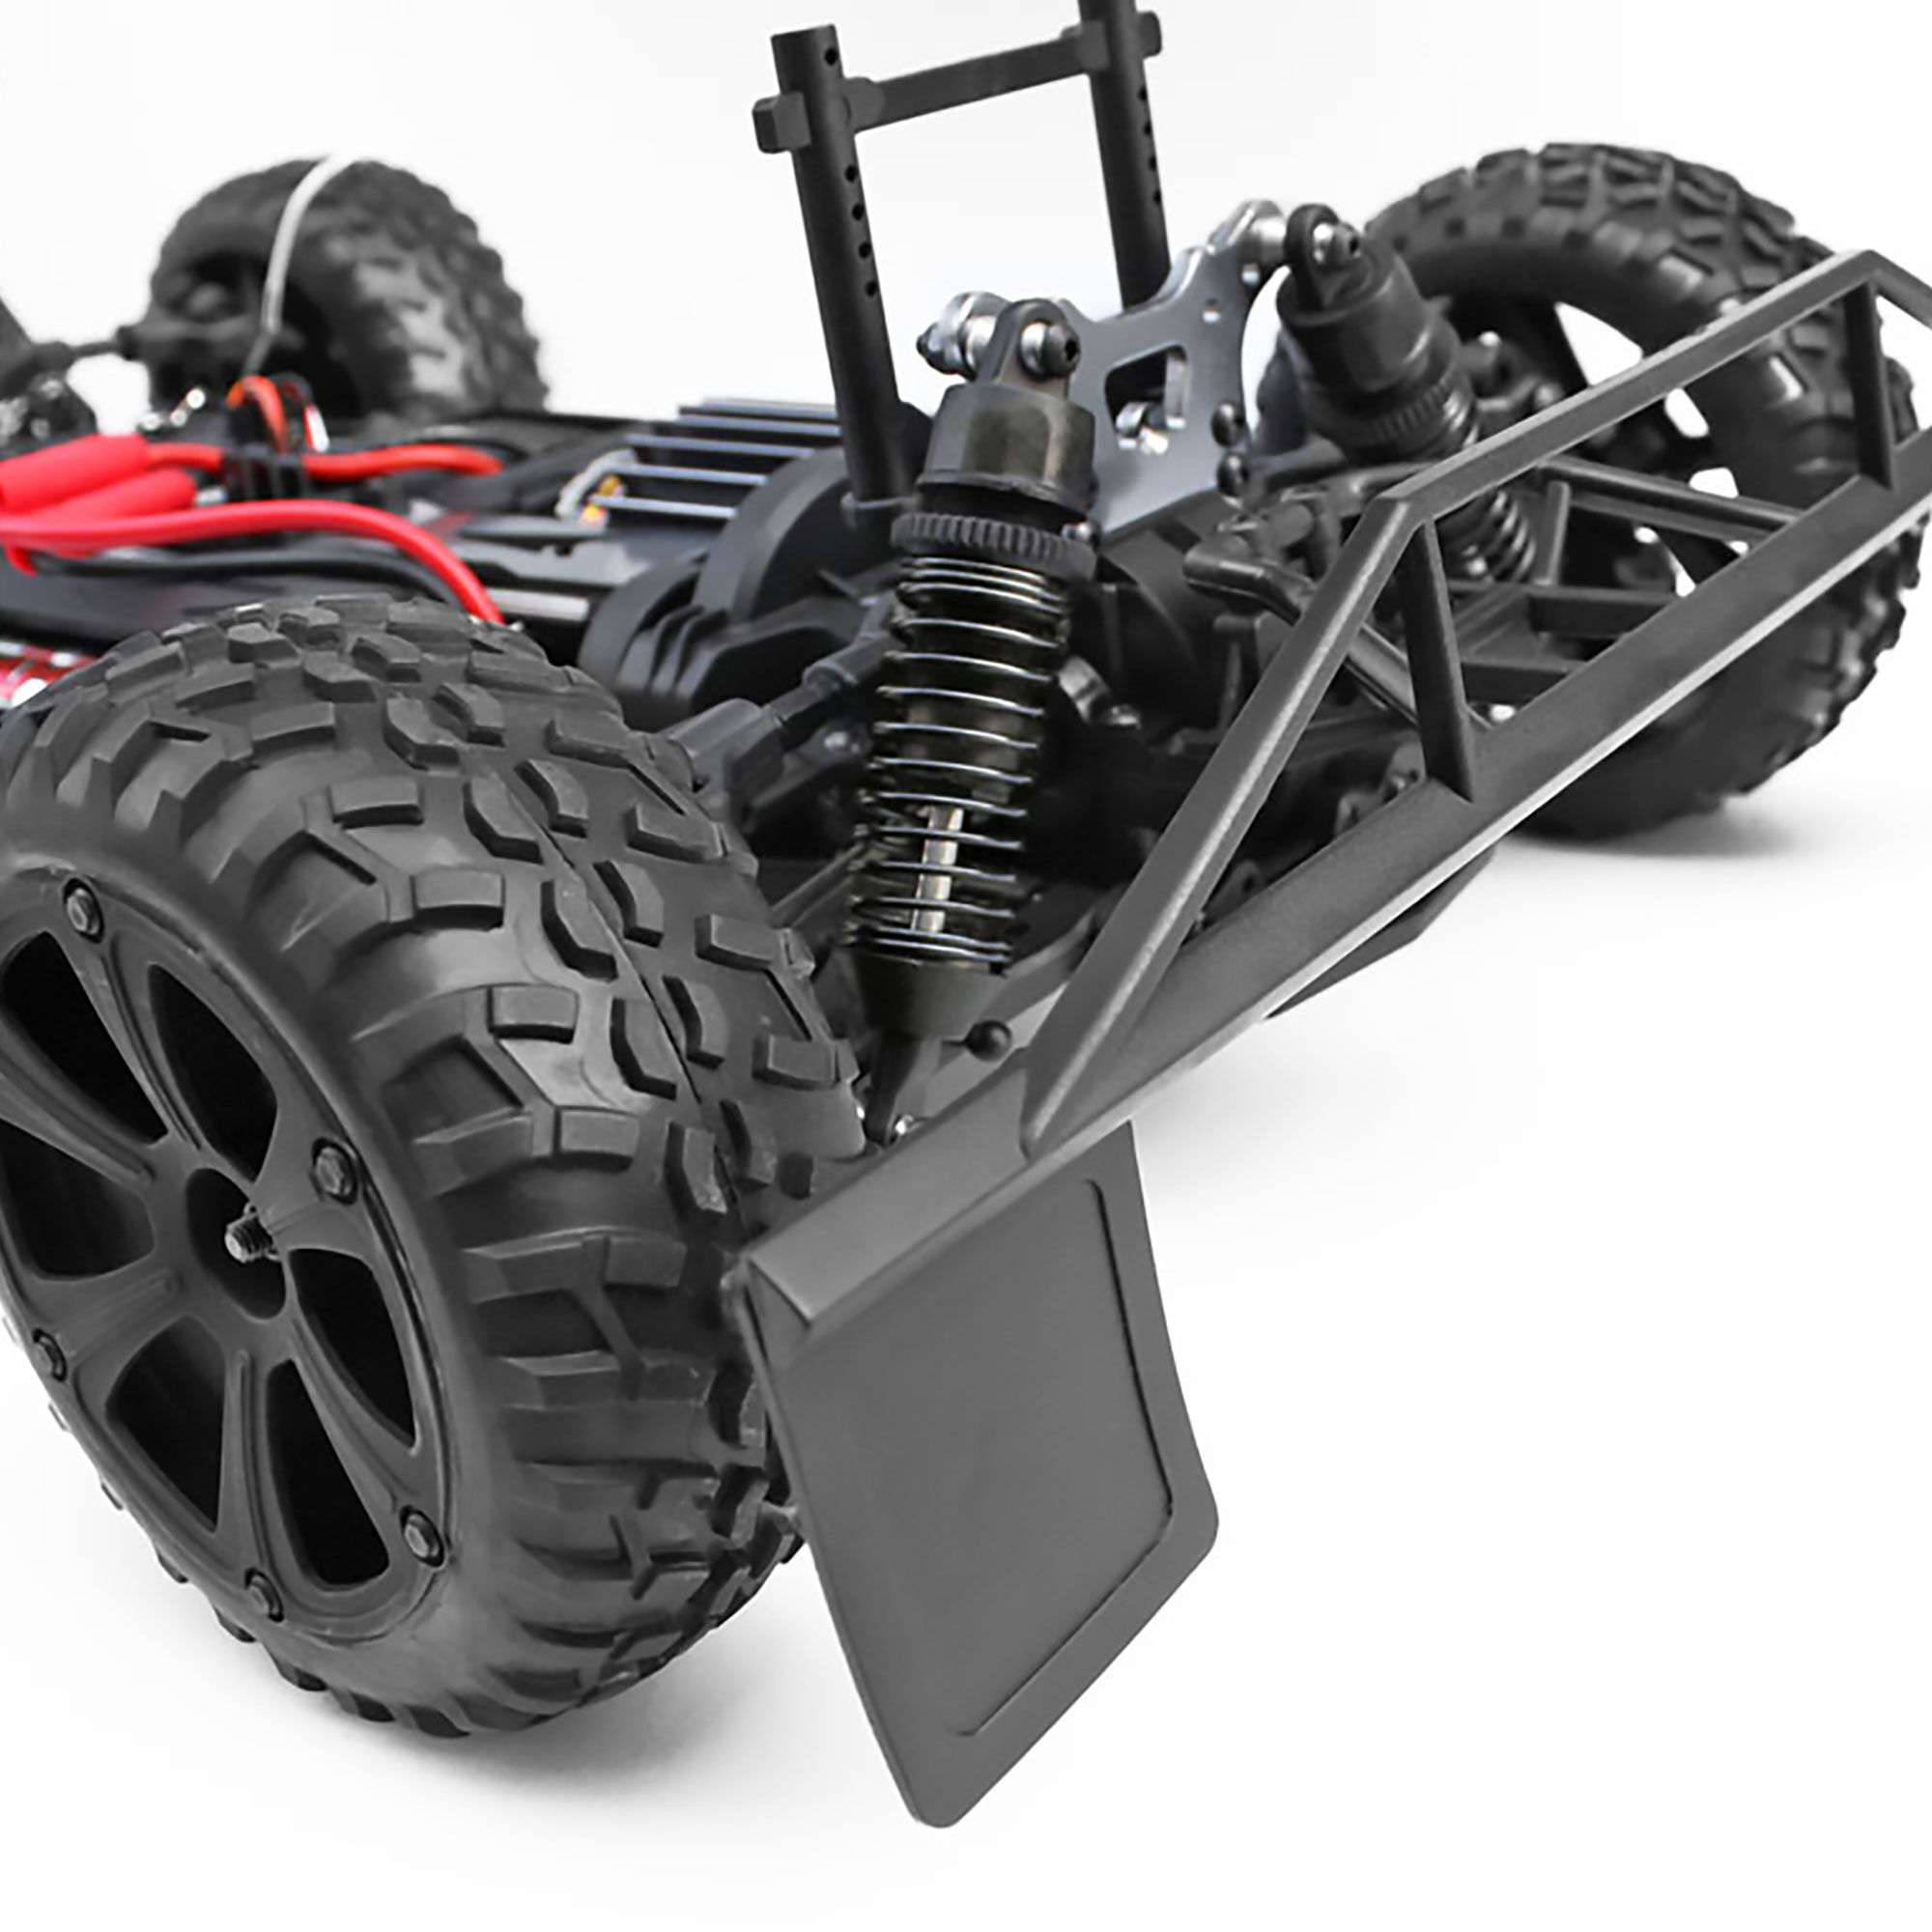 Redcat Racing Blue Blackout SC 1/10 Scale Electric Short Course Truck RTR 